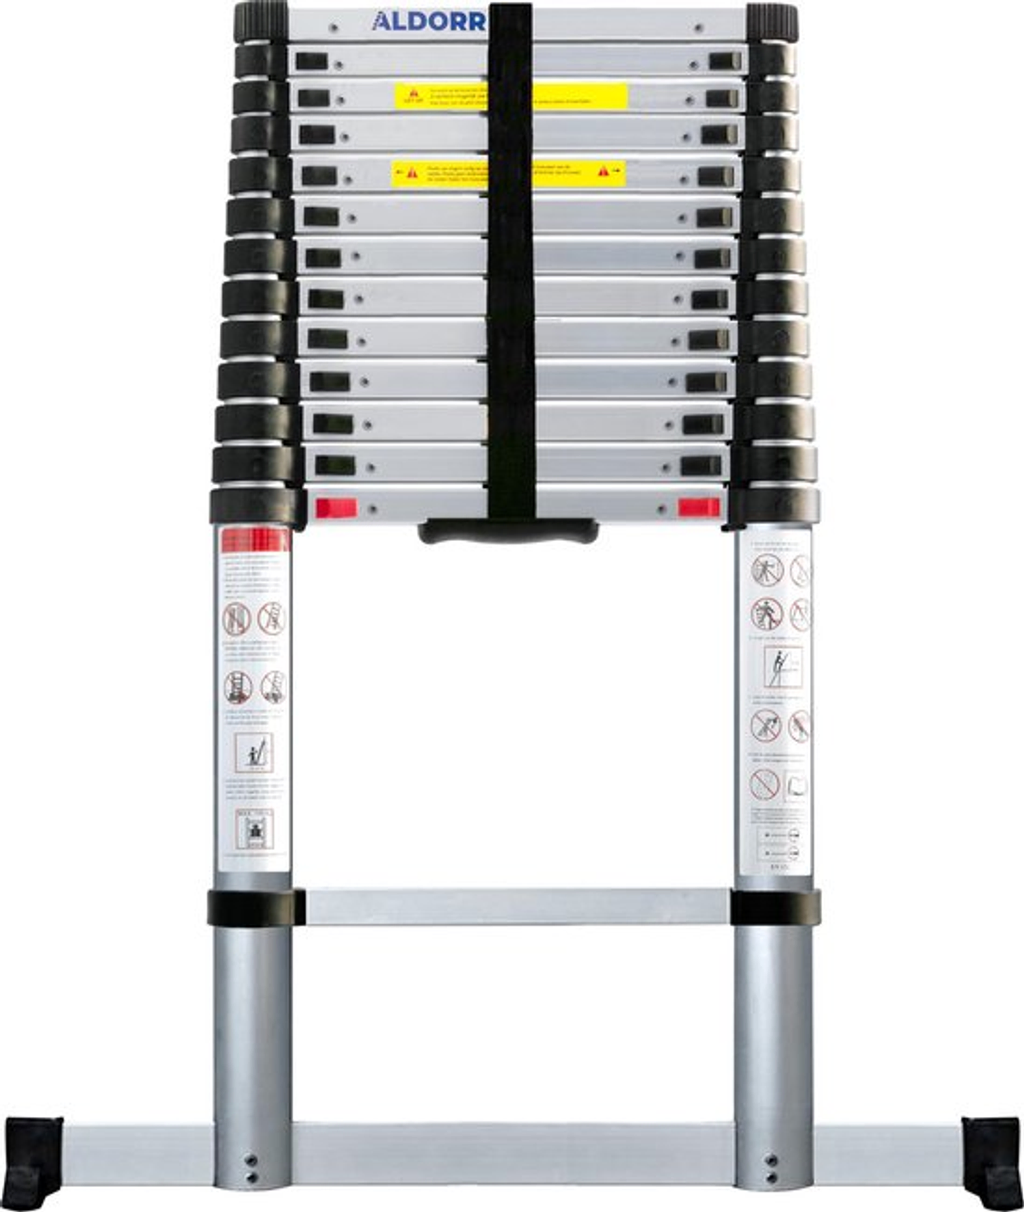 Rent Aldorr Home telescopic ladder 3.80 meters easily and cheaply at BIYU